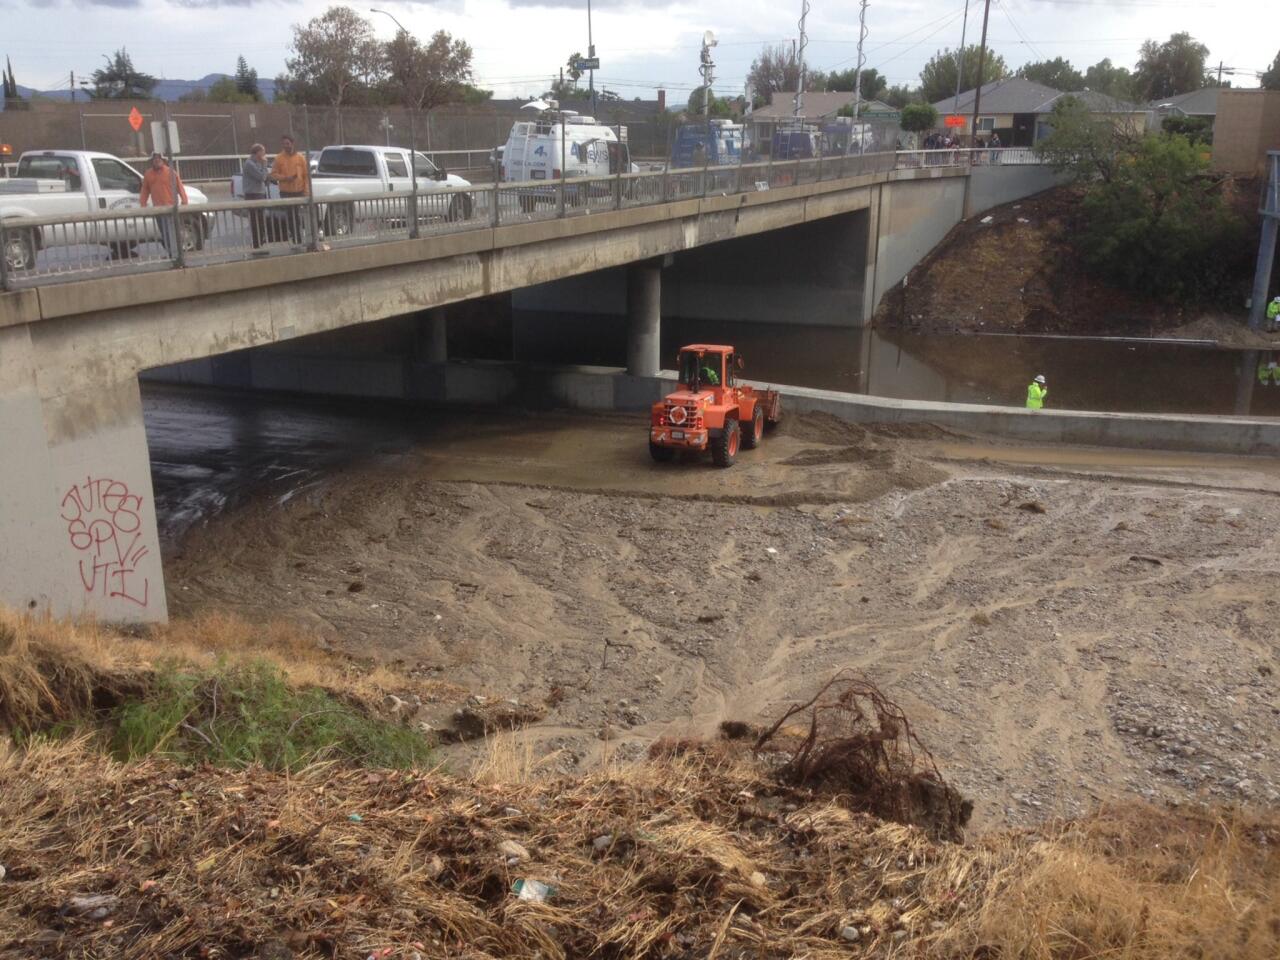 Flooding and mud closed the 5 Freeway in both directions in Sunland on Wednesday after a storm caused debris to flow down across all lanes.